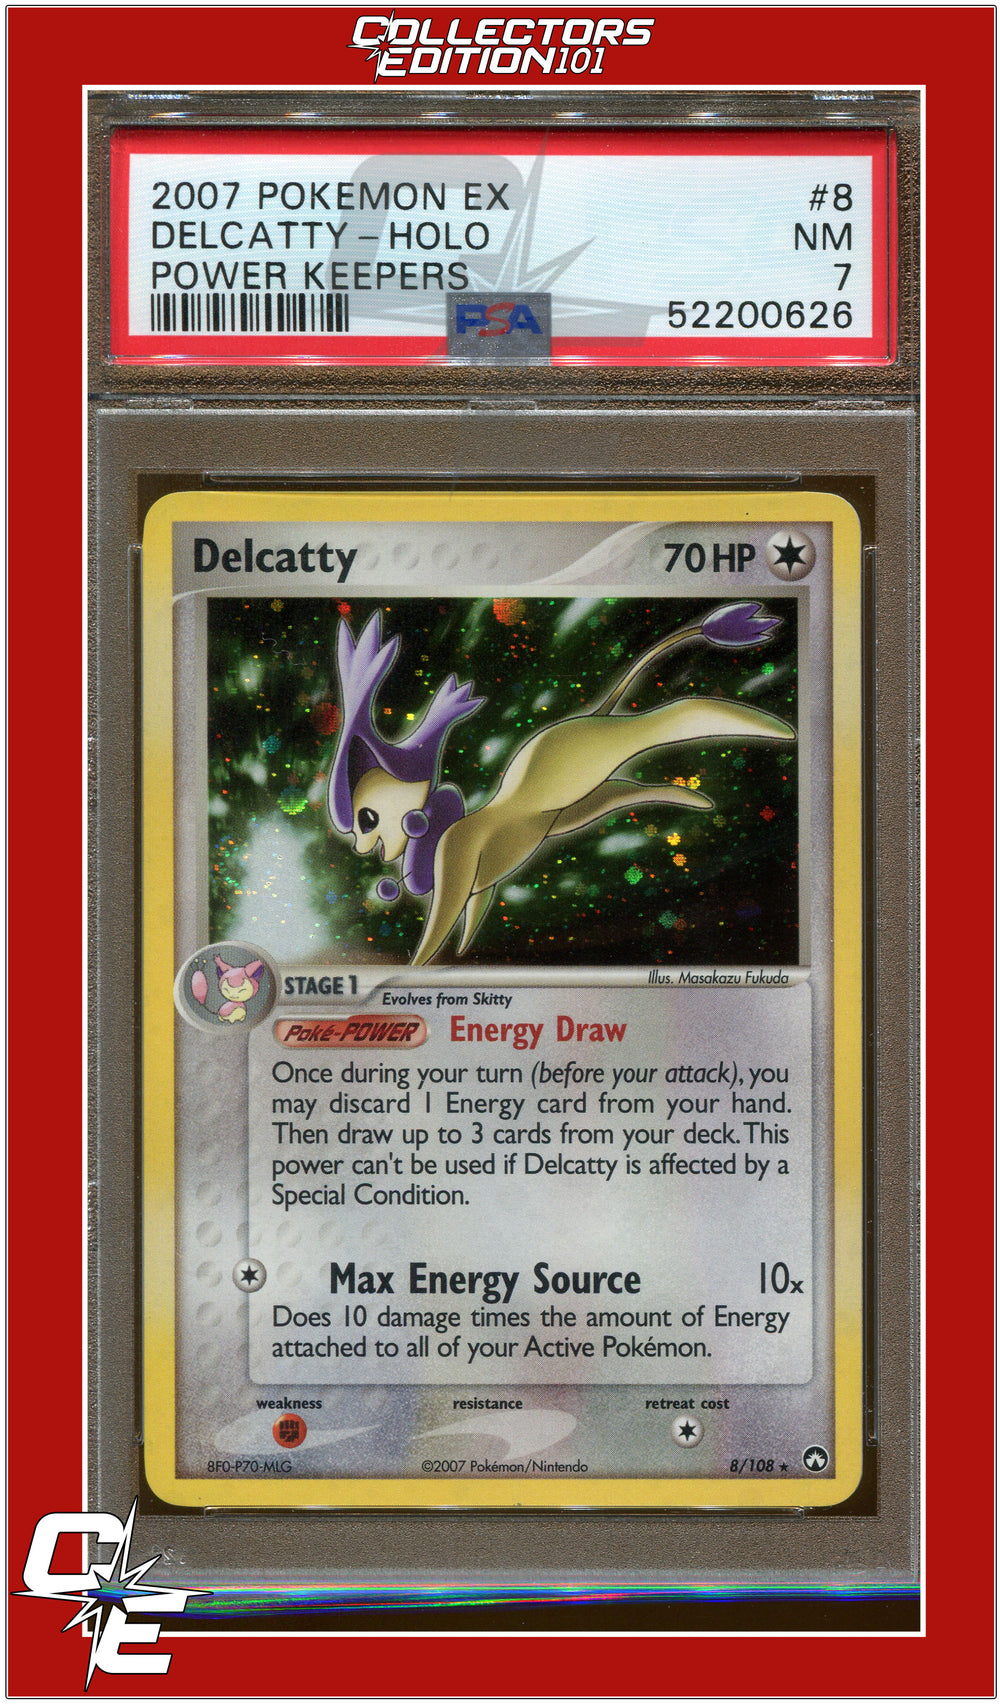 EX Power Keepers 8 Delcatty Holo PSA 7